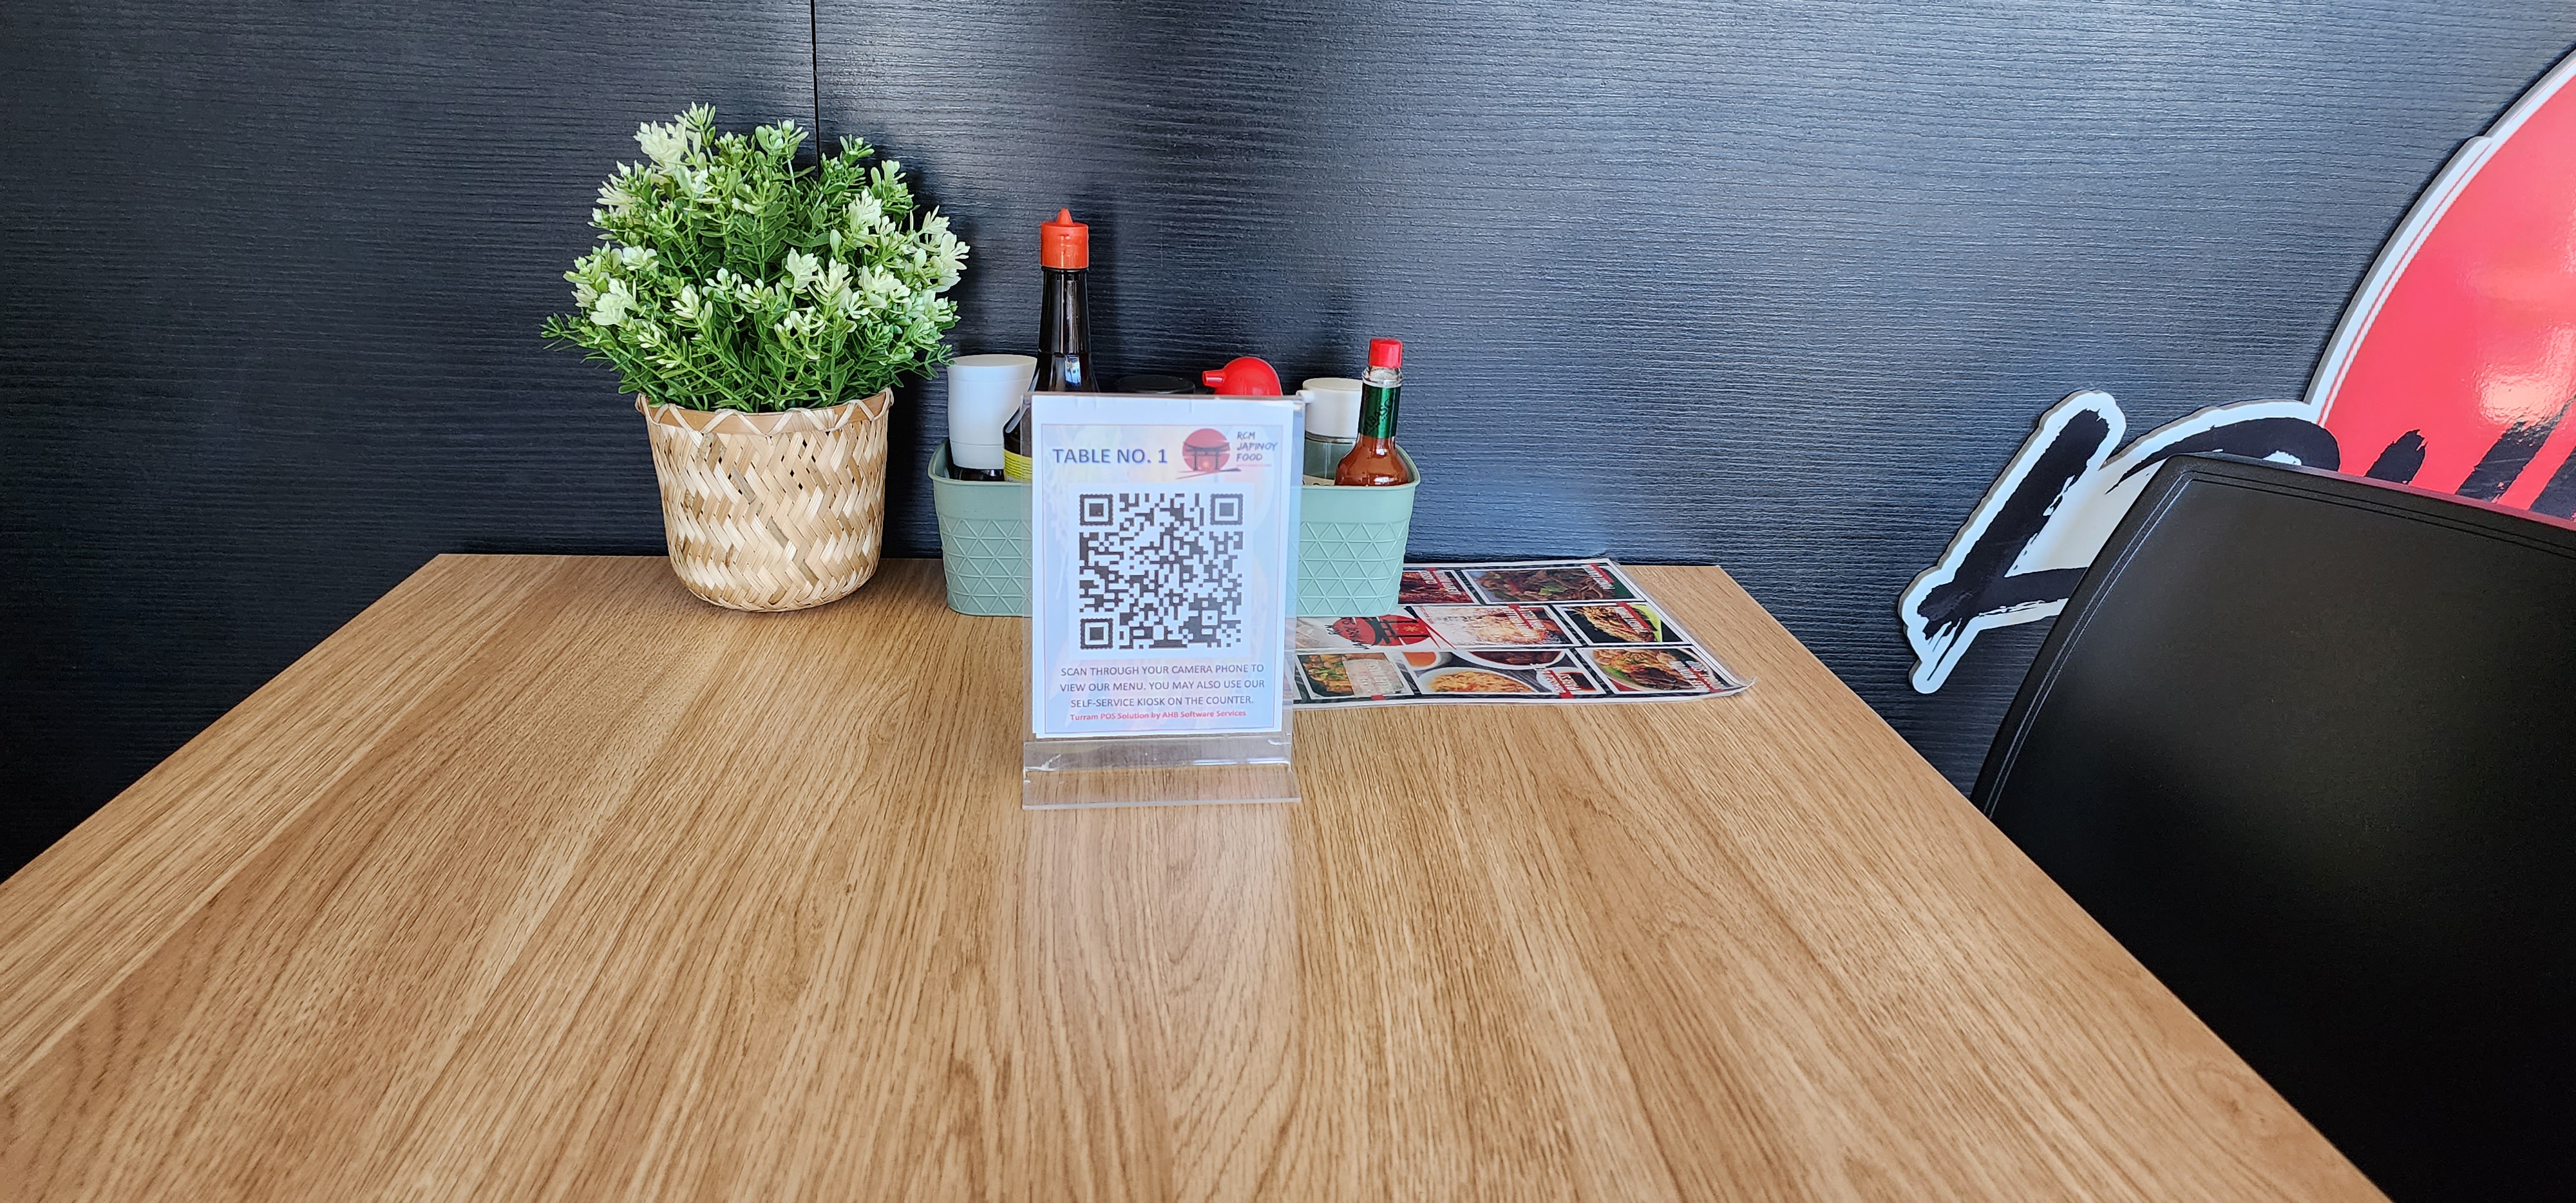 Table Ordering using QR Code